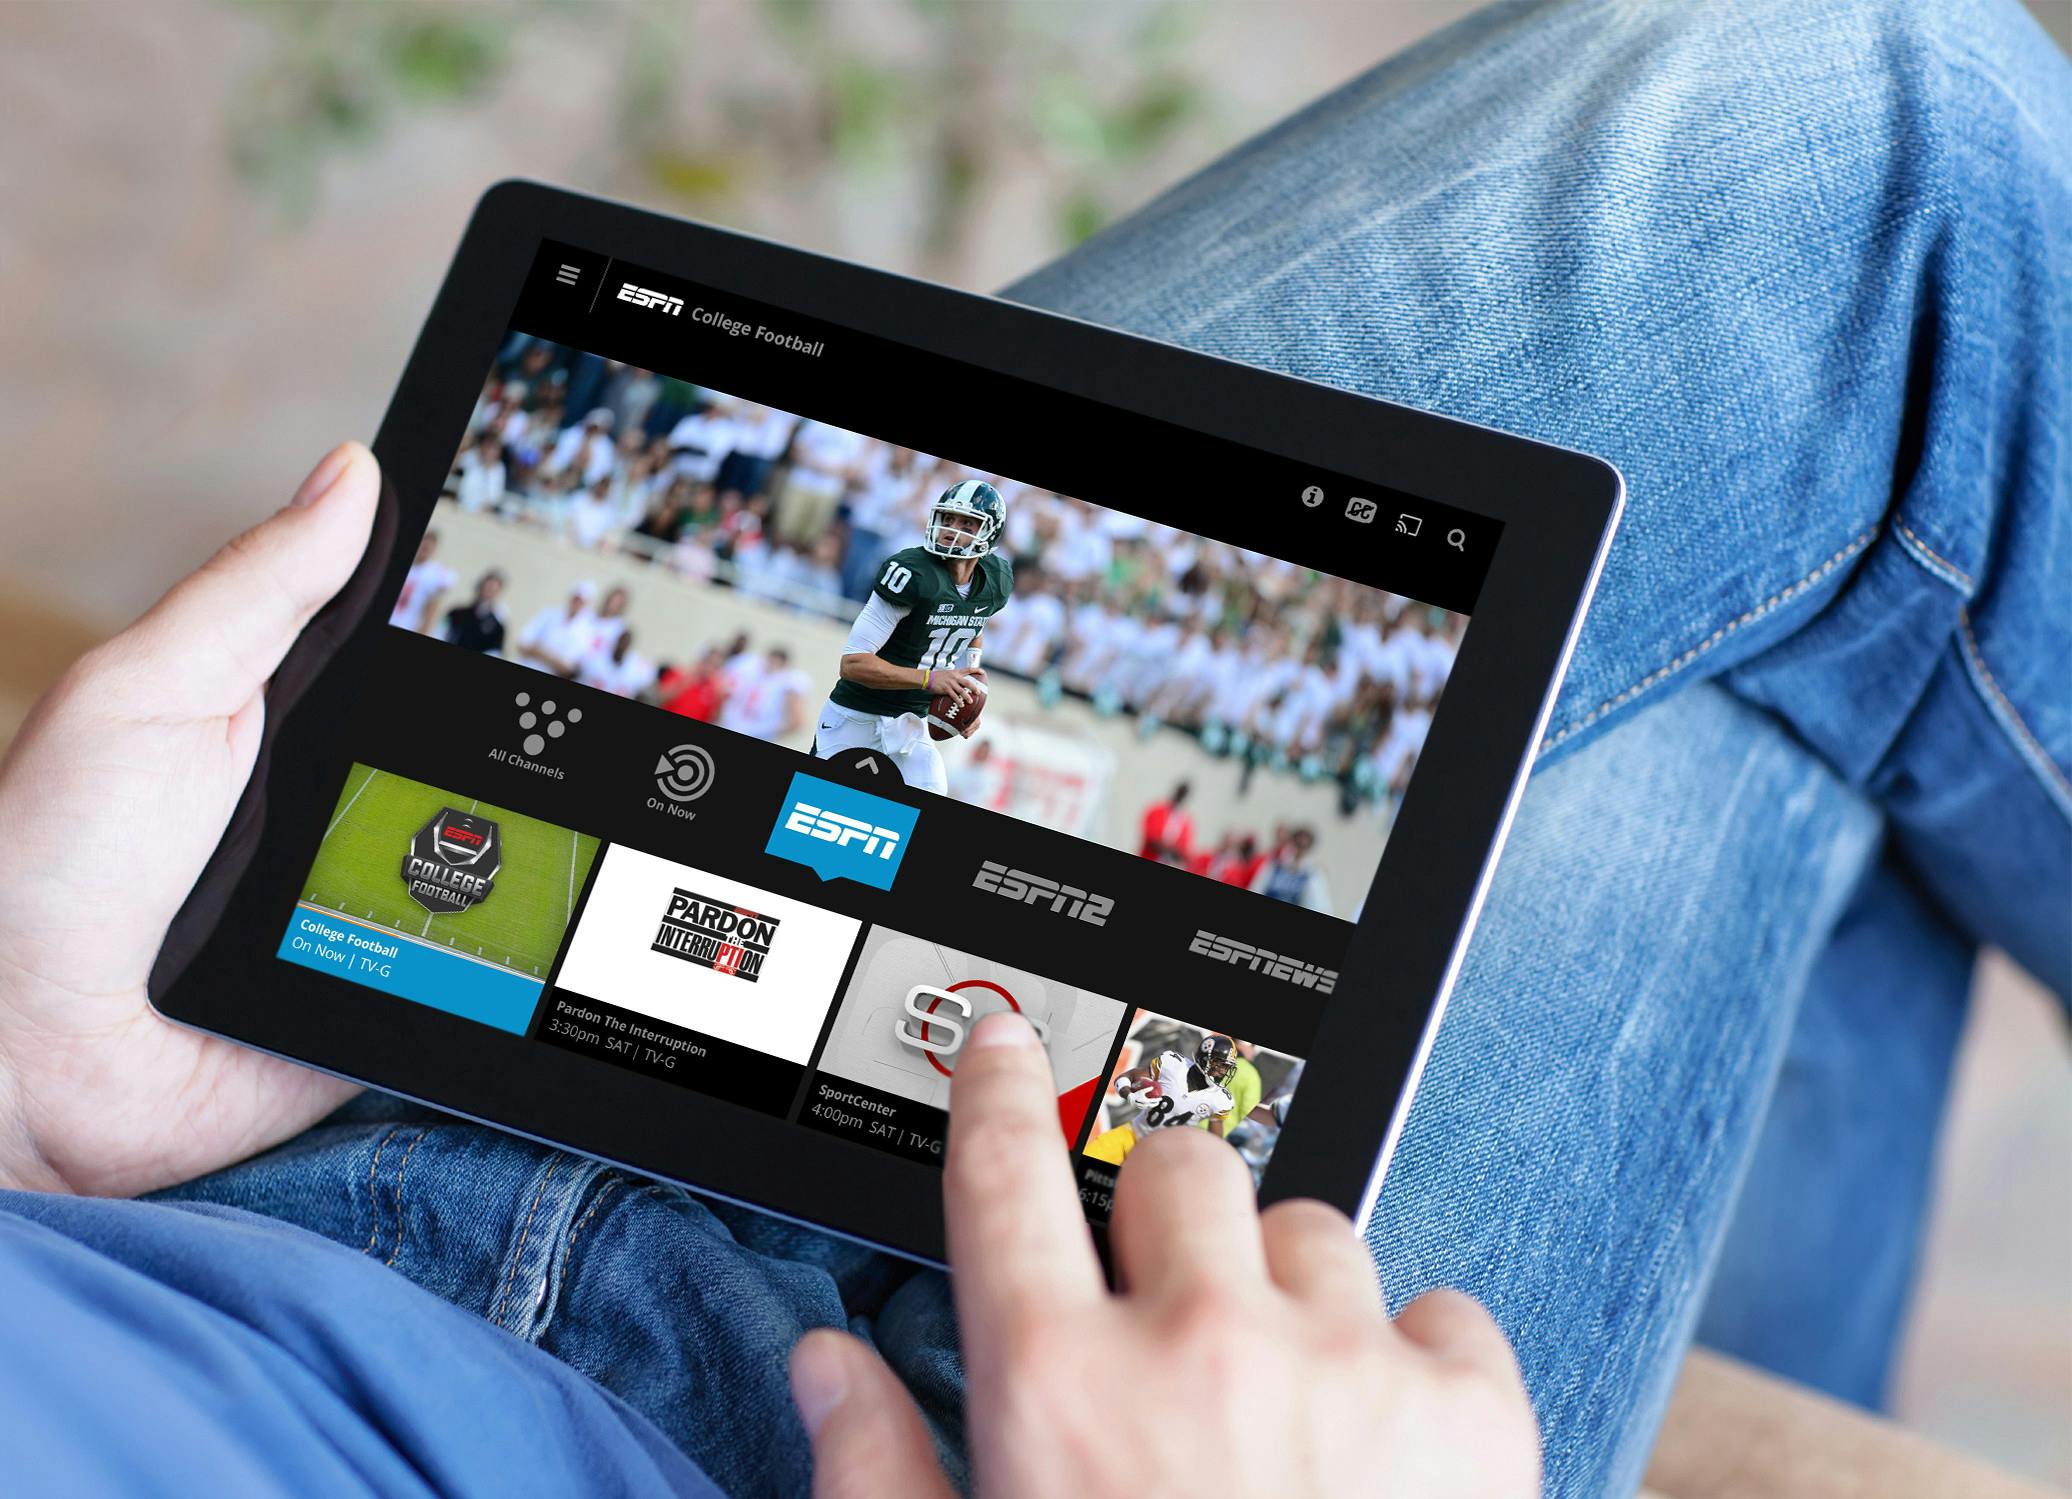 Sling TV Offers and Deals